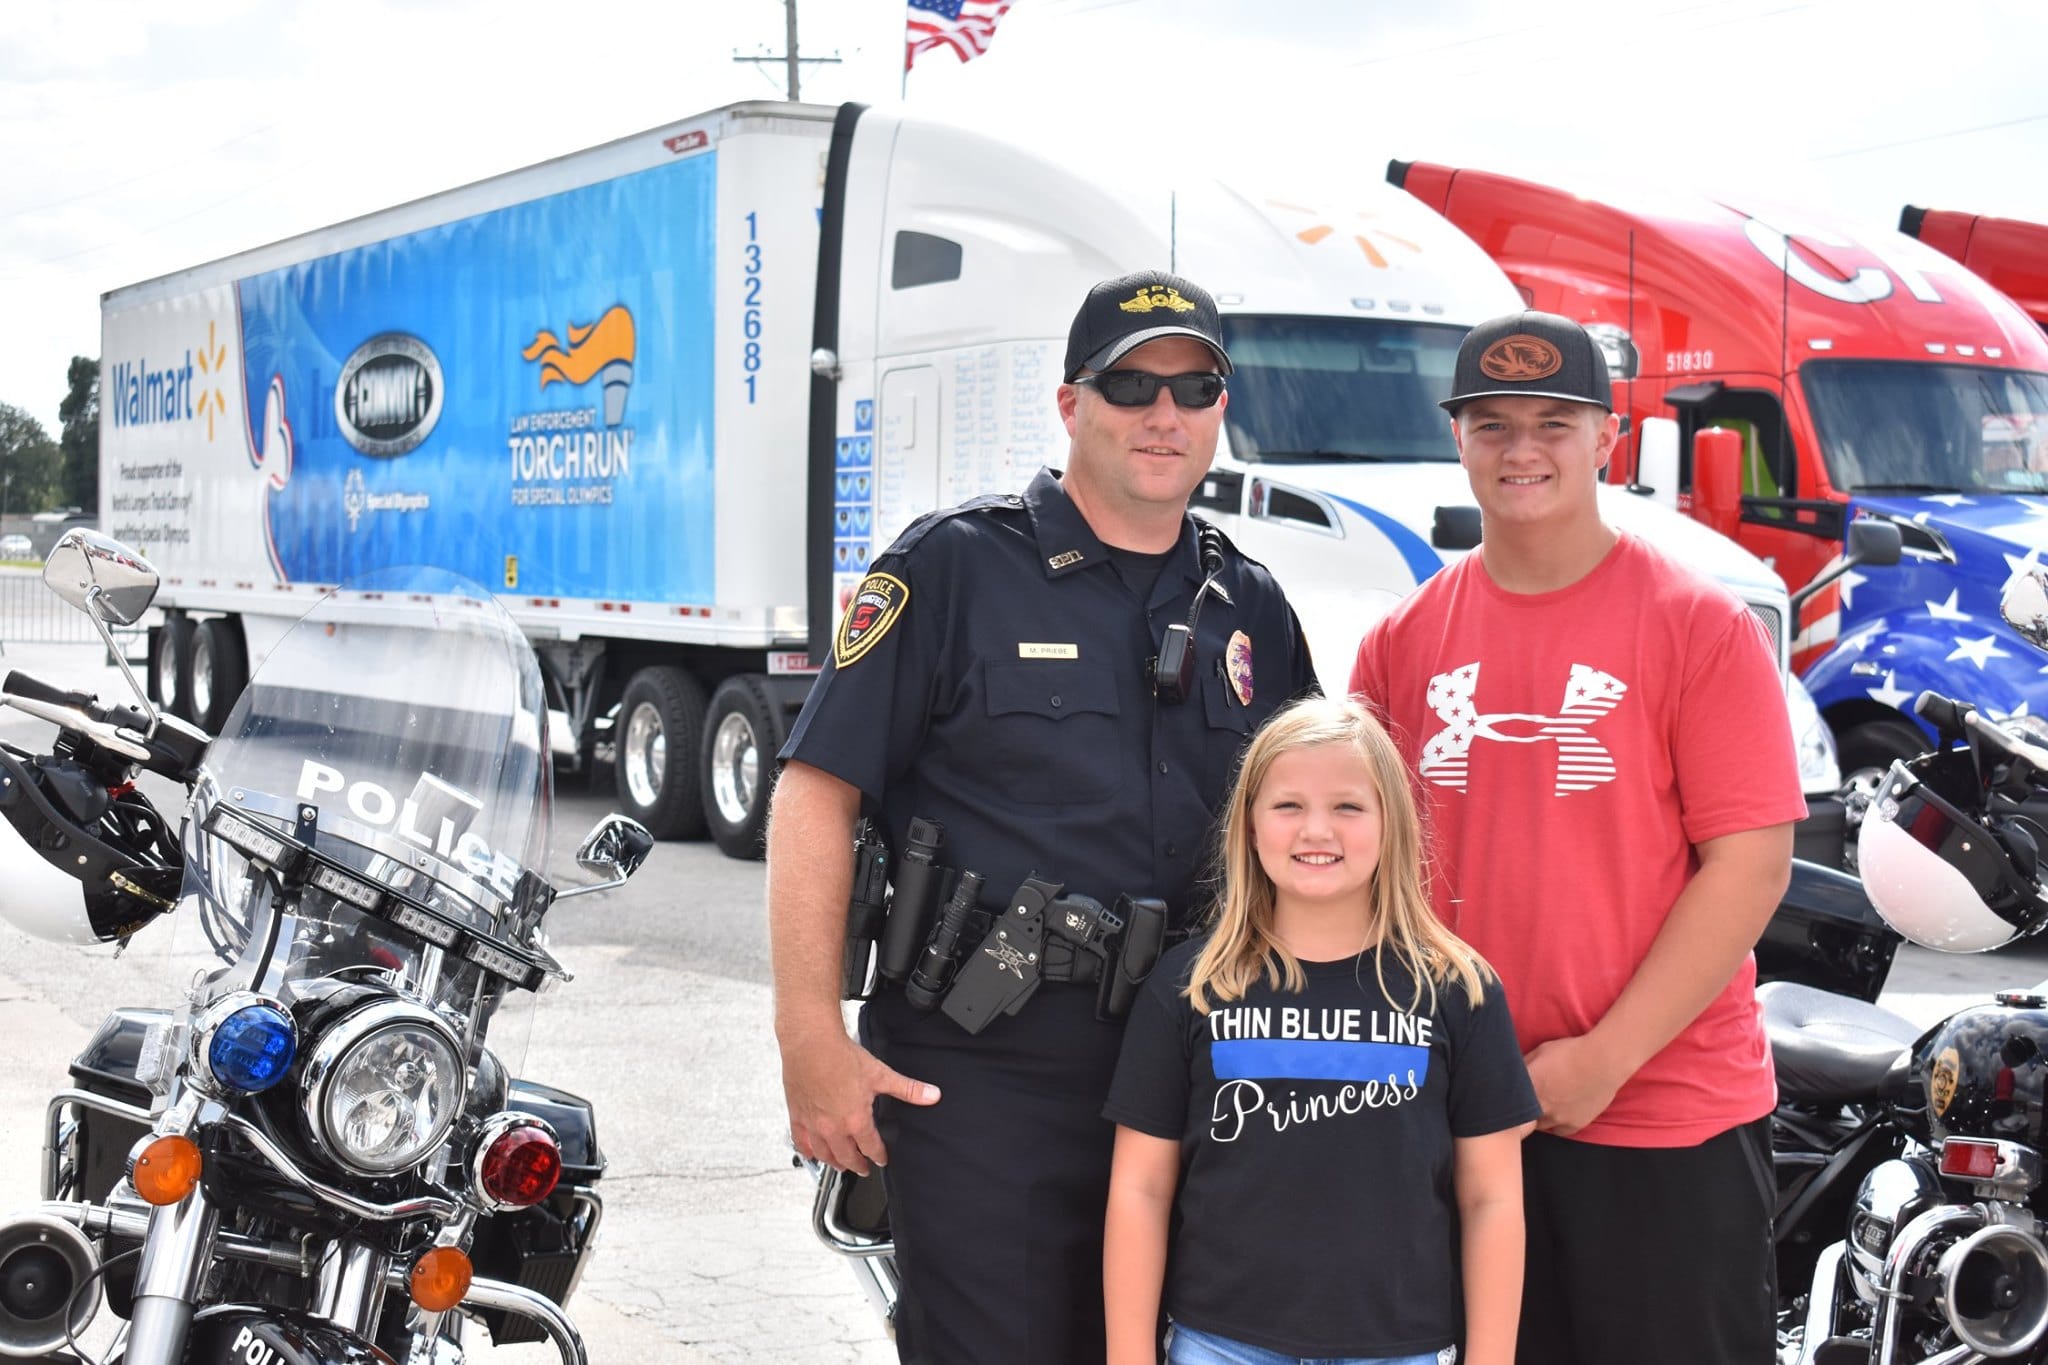 Sargent Mark Priebe poses for a photo with his two children in front of motorcycles and semi-trucks